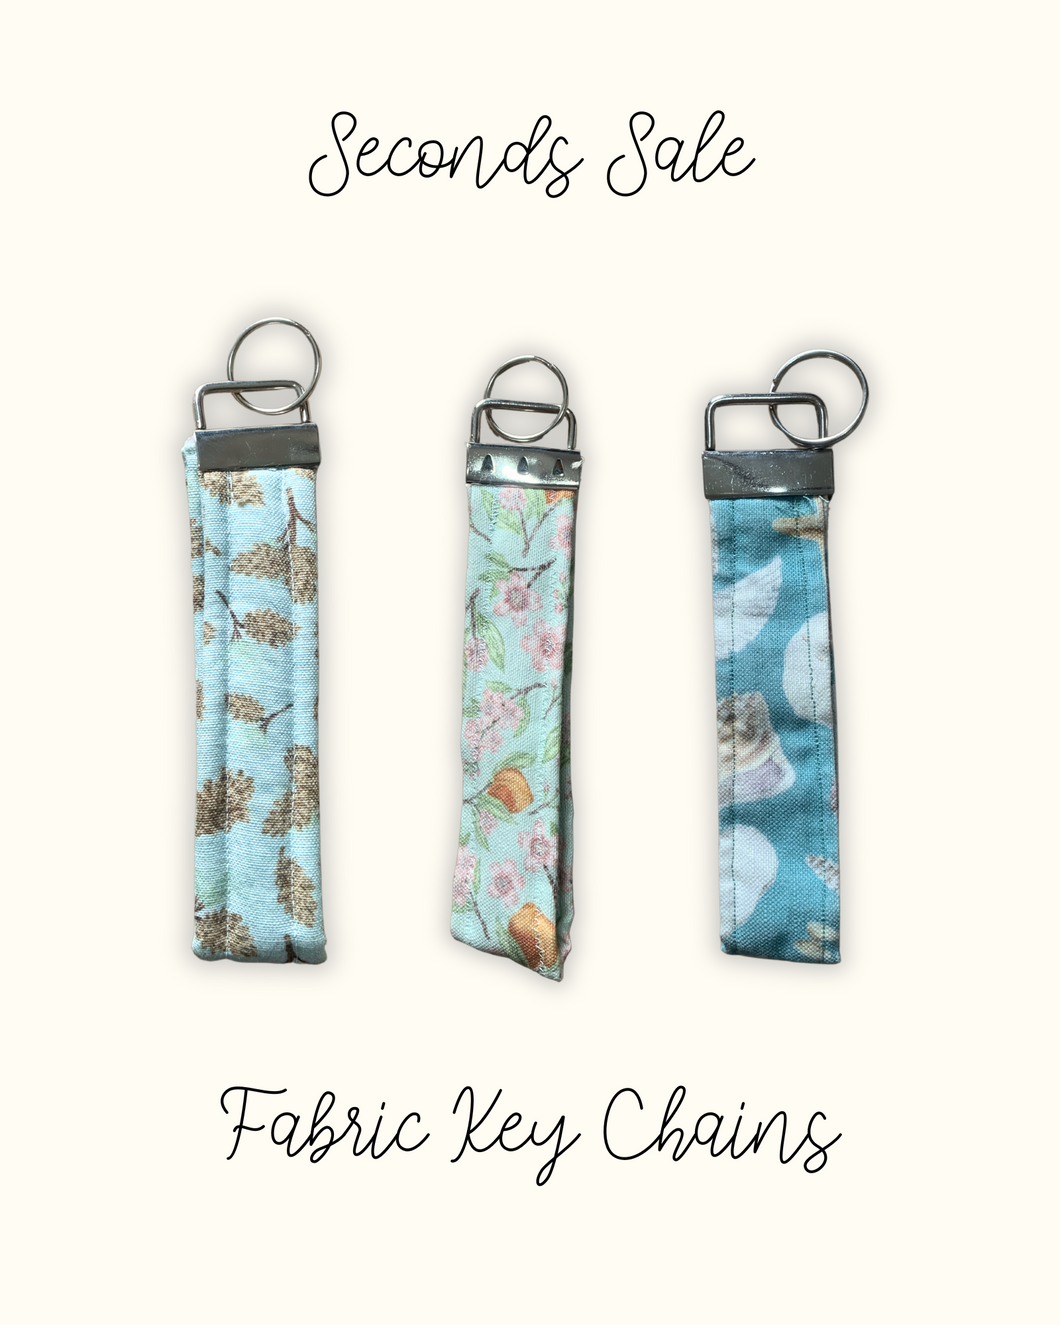 Fabric Key Chains - Seconds Sale